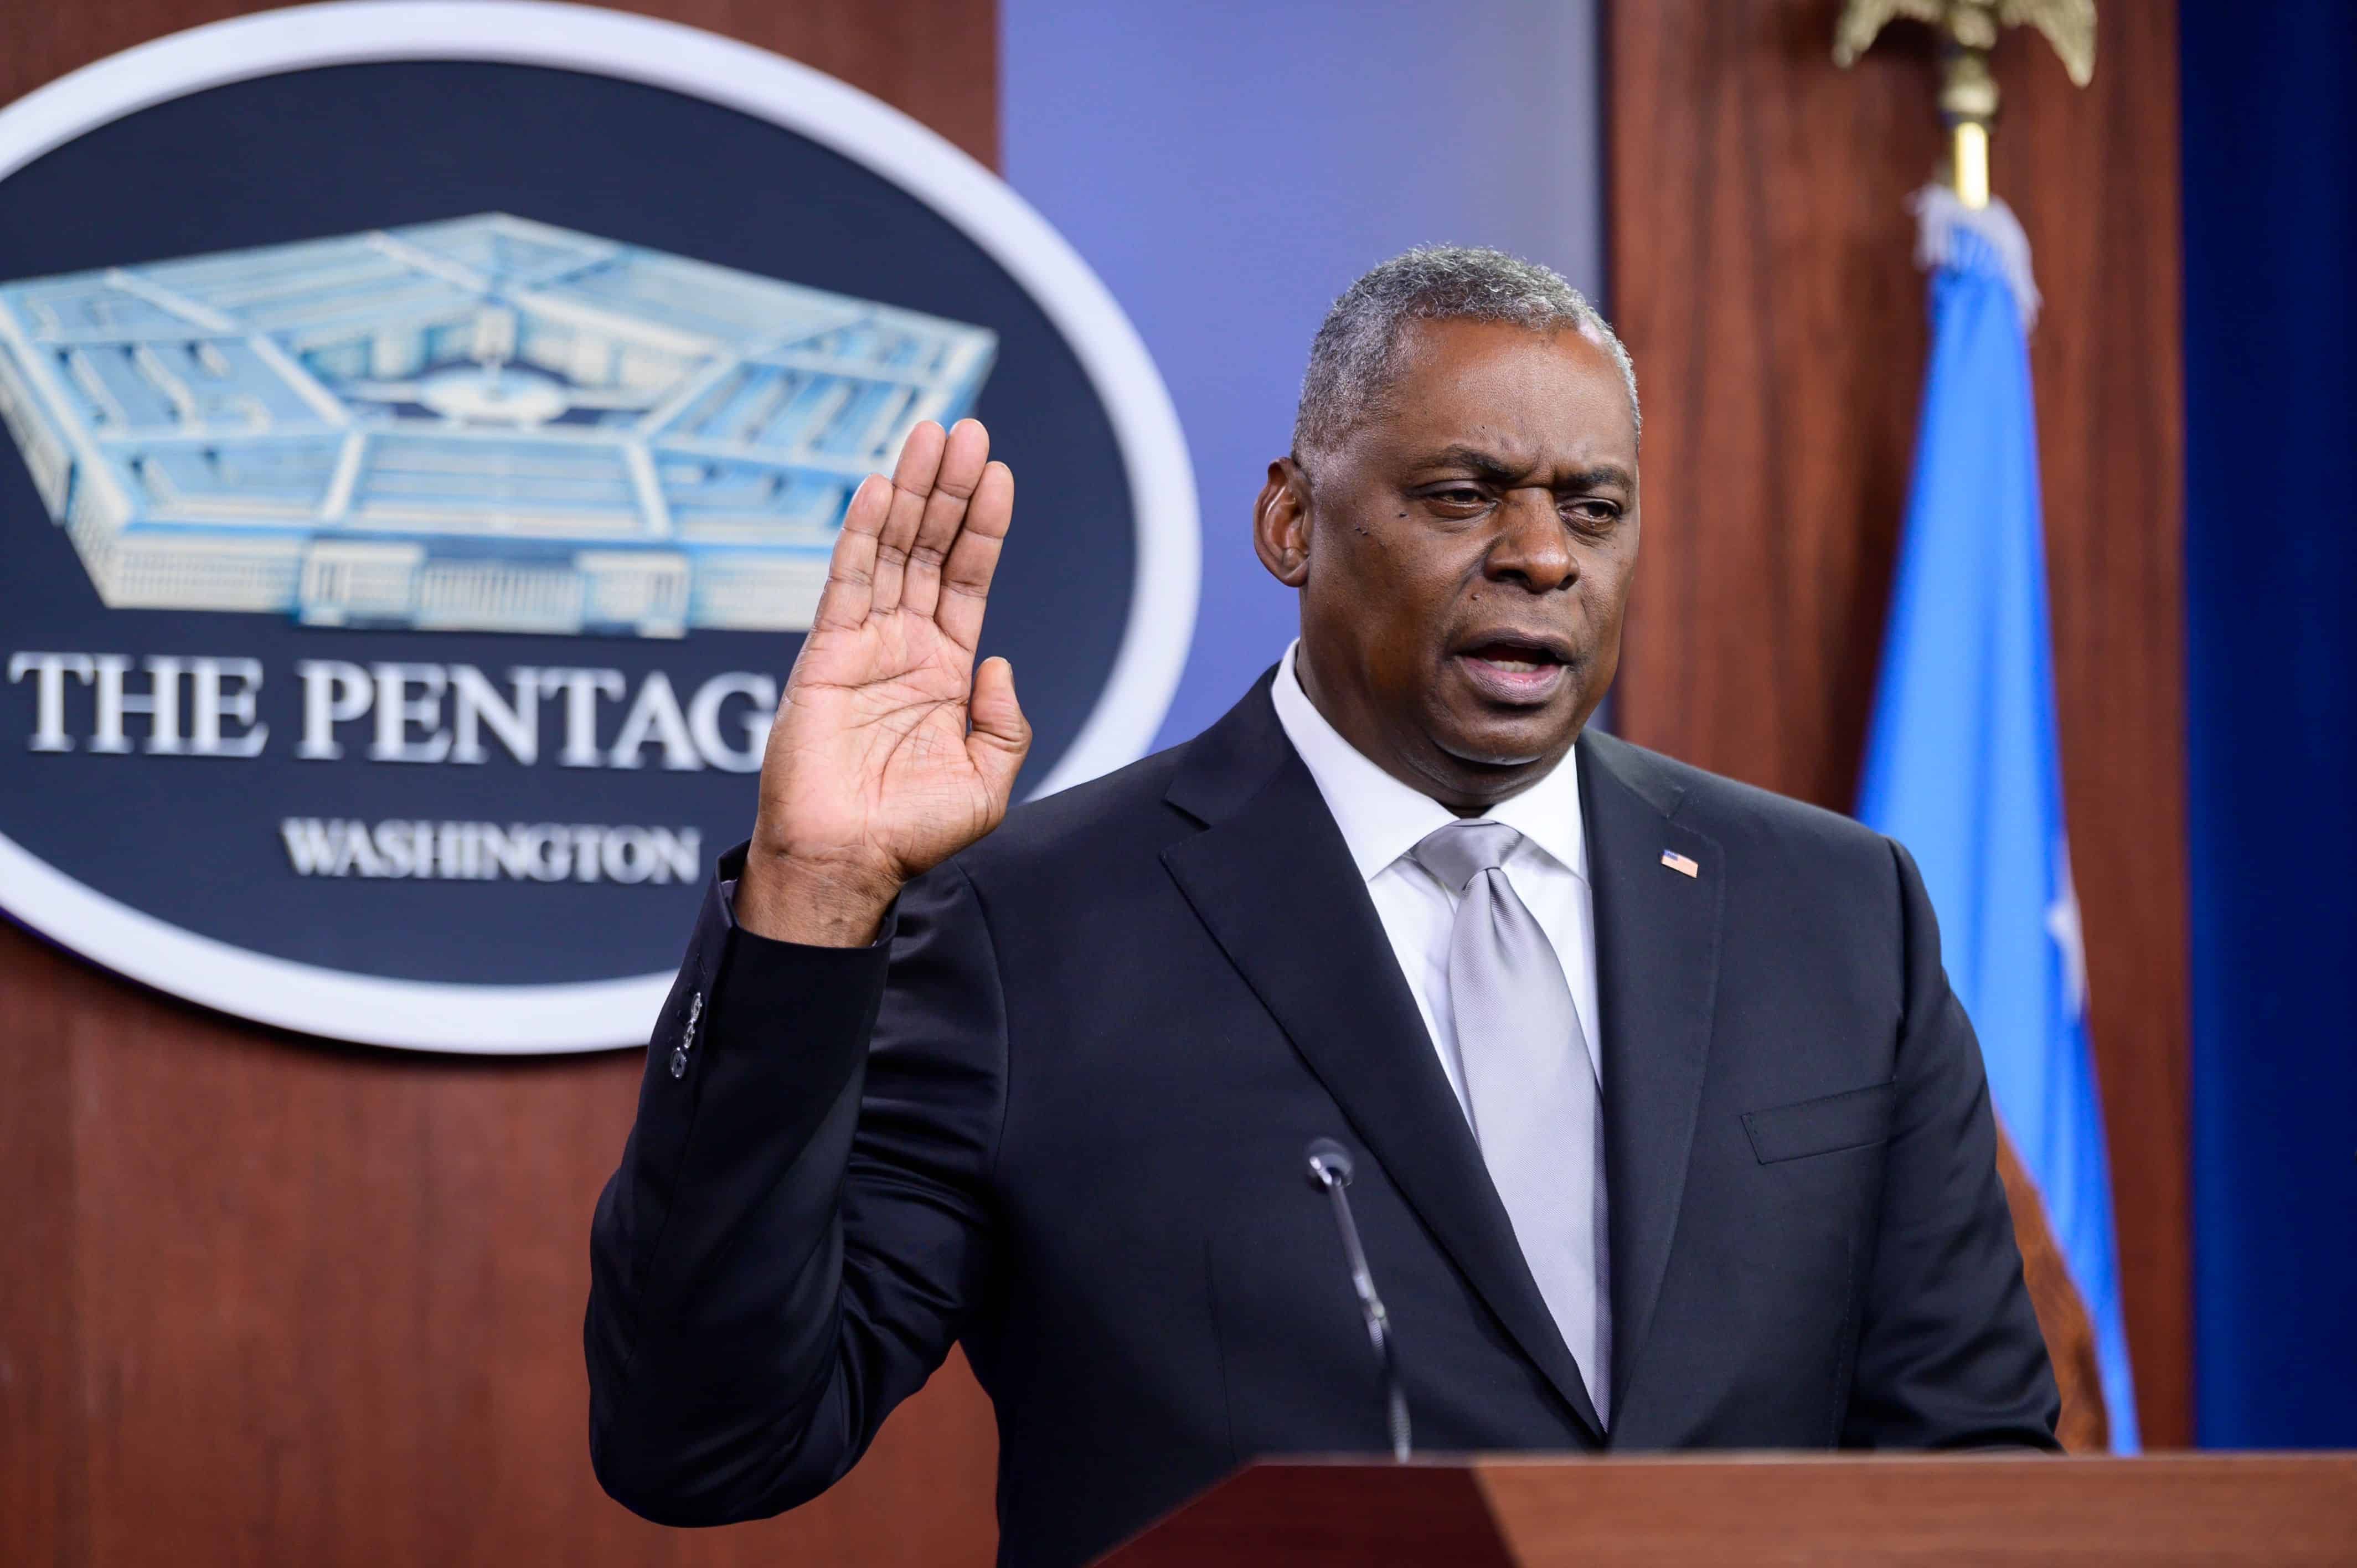 Secretary of Defense Lloyd J. Austin III administers the Oath of Office to newly appointed Armed Forces officers during the 2021 Florida Agricultural and Mechanical University commencement ceremony, virtually, at the Pentagon, Washington, D.C., April 24, 2021. (DoD photo by U.S. Air Force Staff Sgt. Brittany A. Chase)